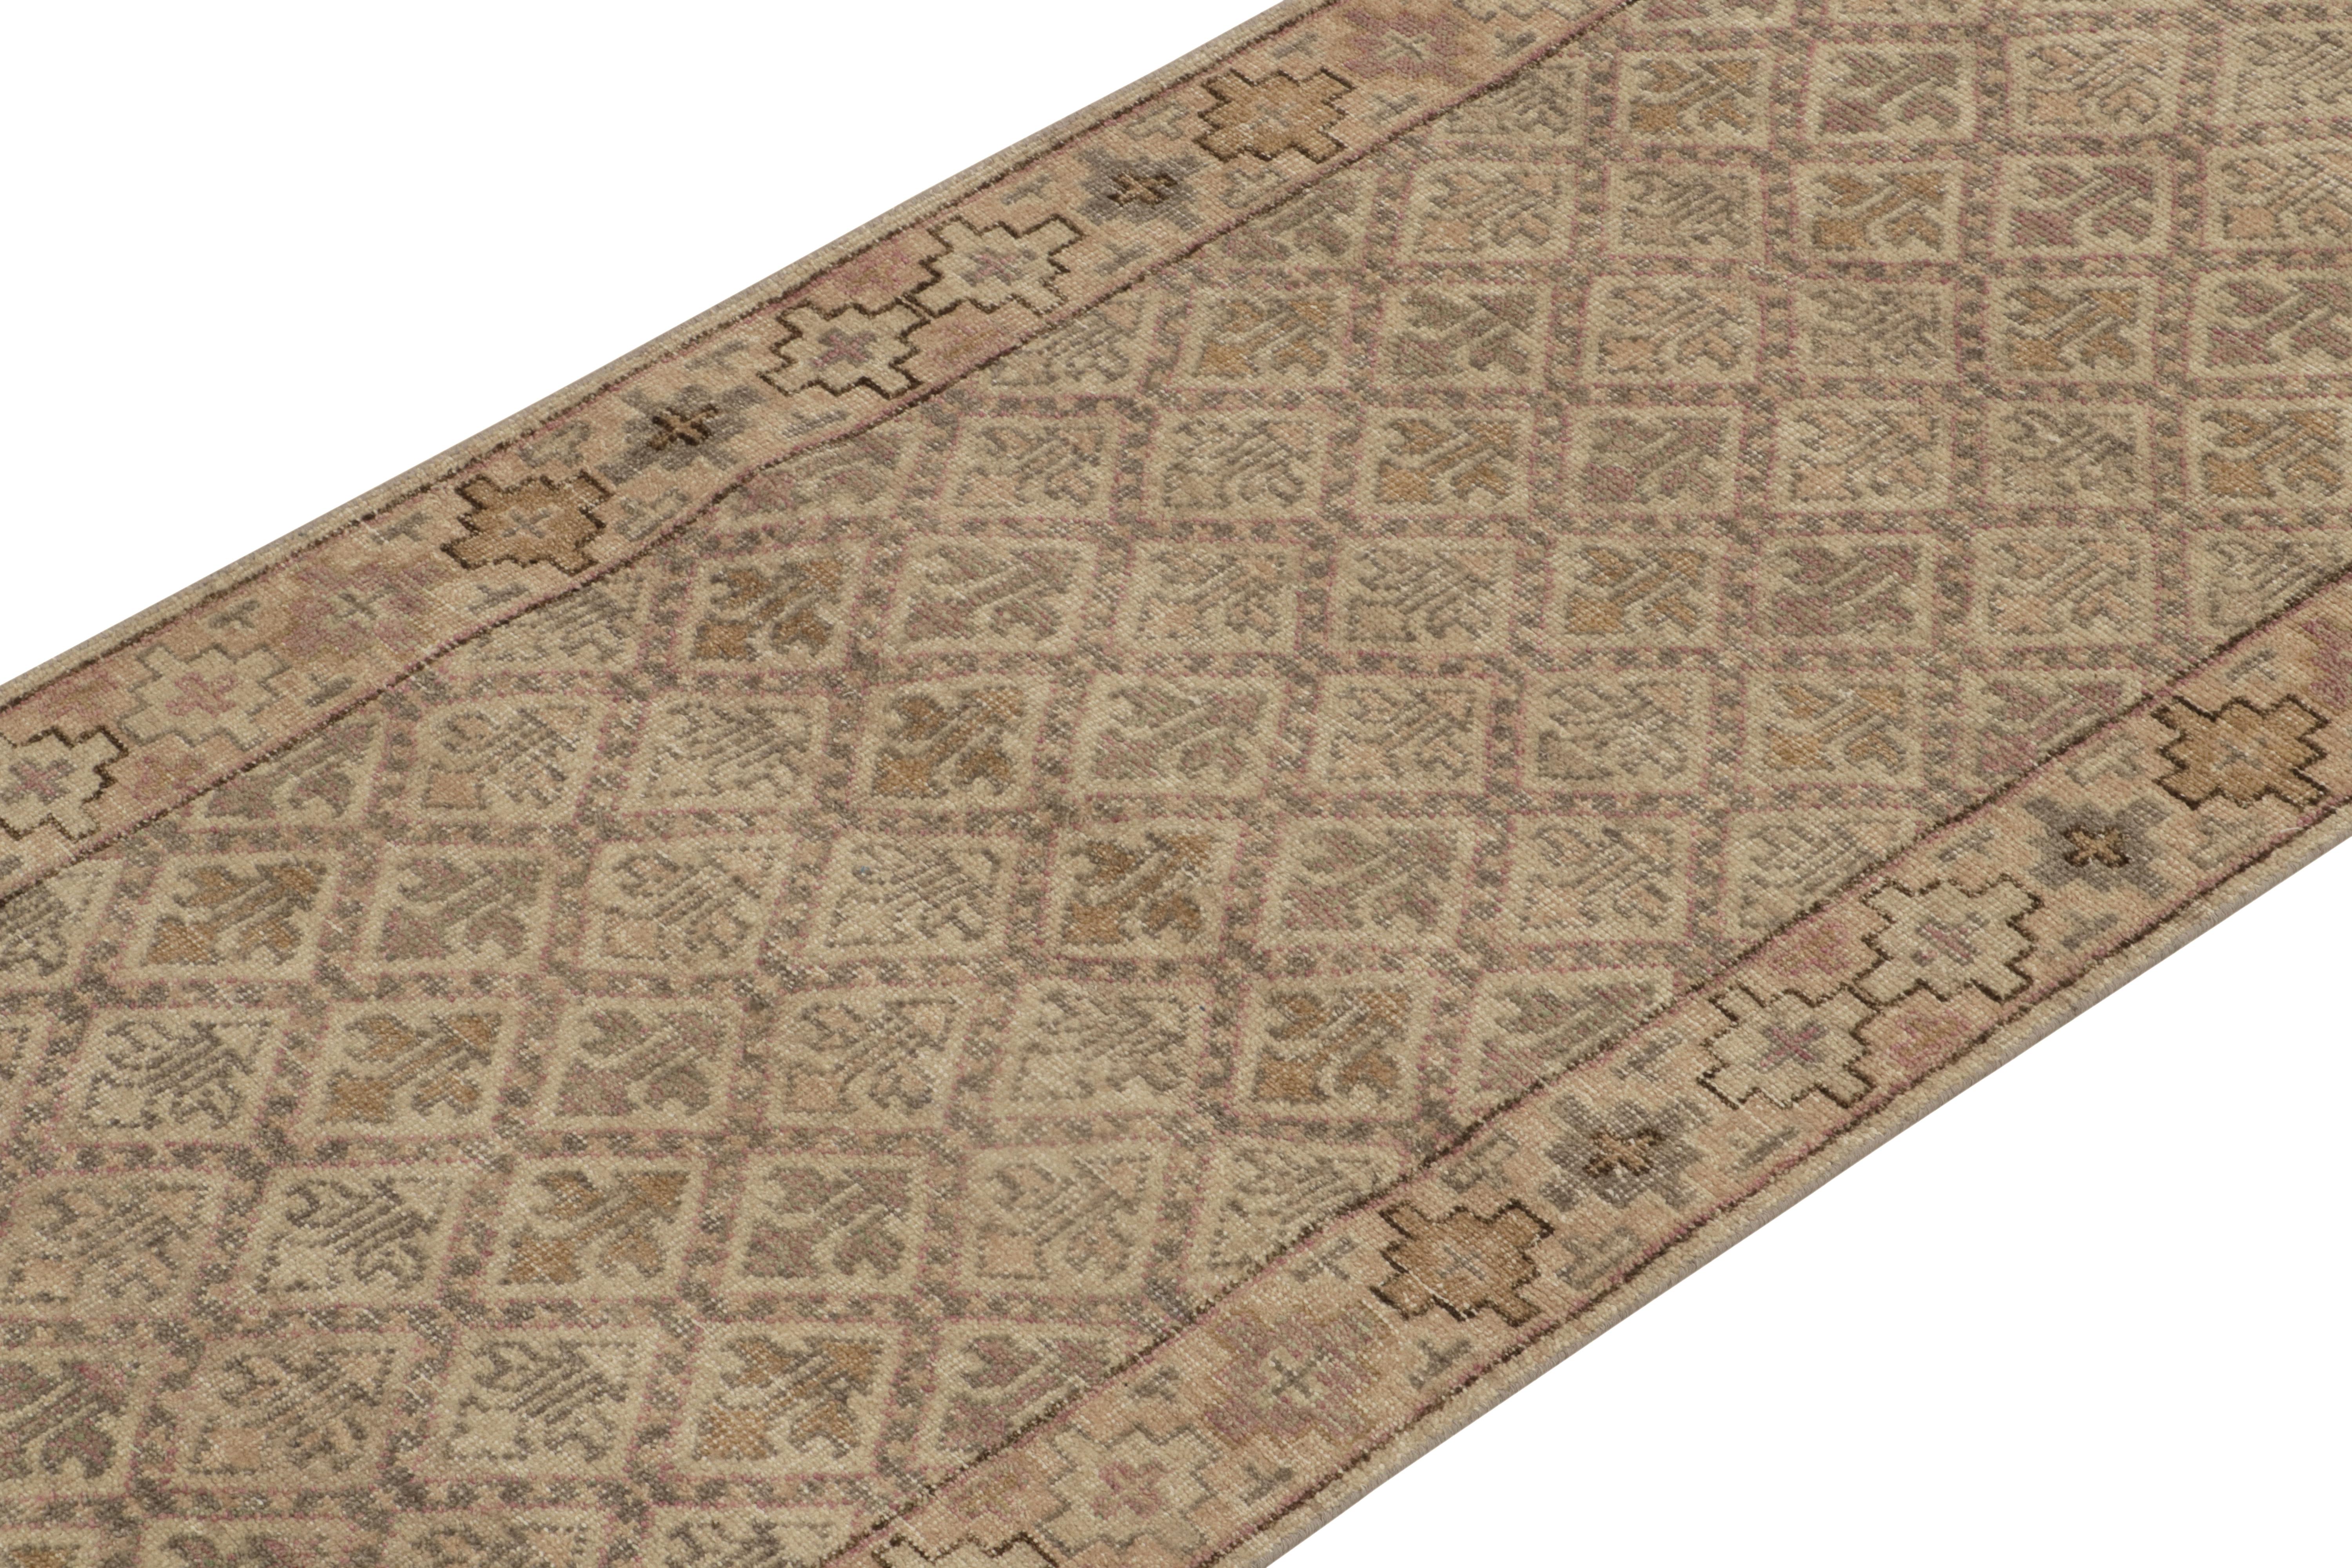 Hand-Knotted Rug & Kilim’s Distressed Style Runner in Beige-Brown & Grey Tribal Patterns For Sale